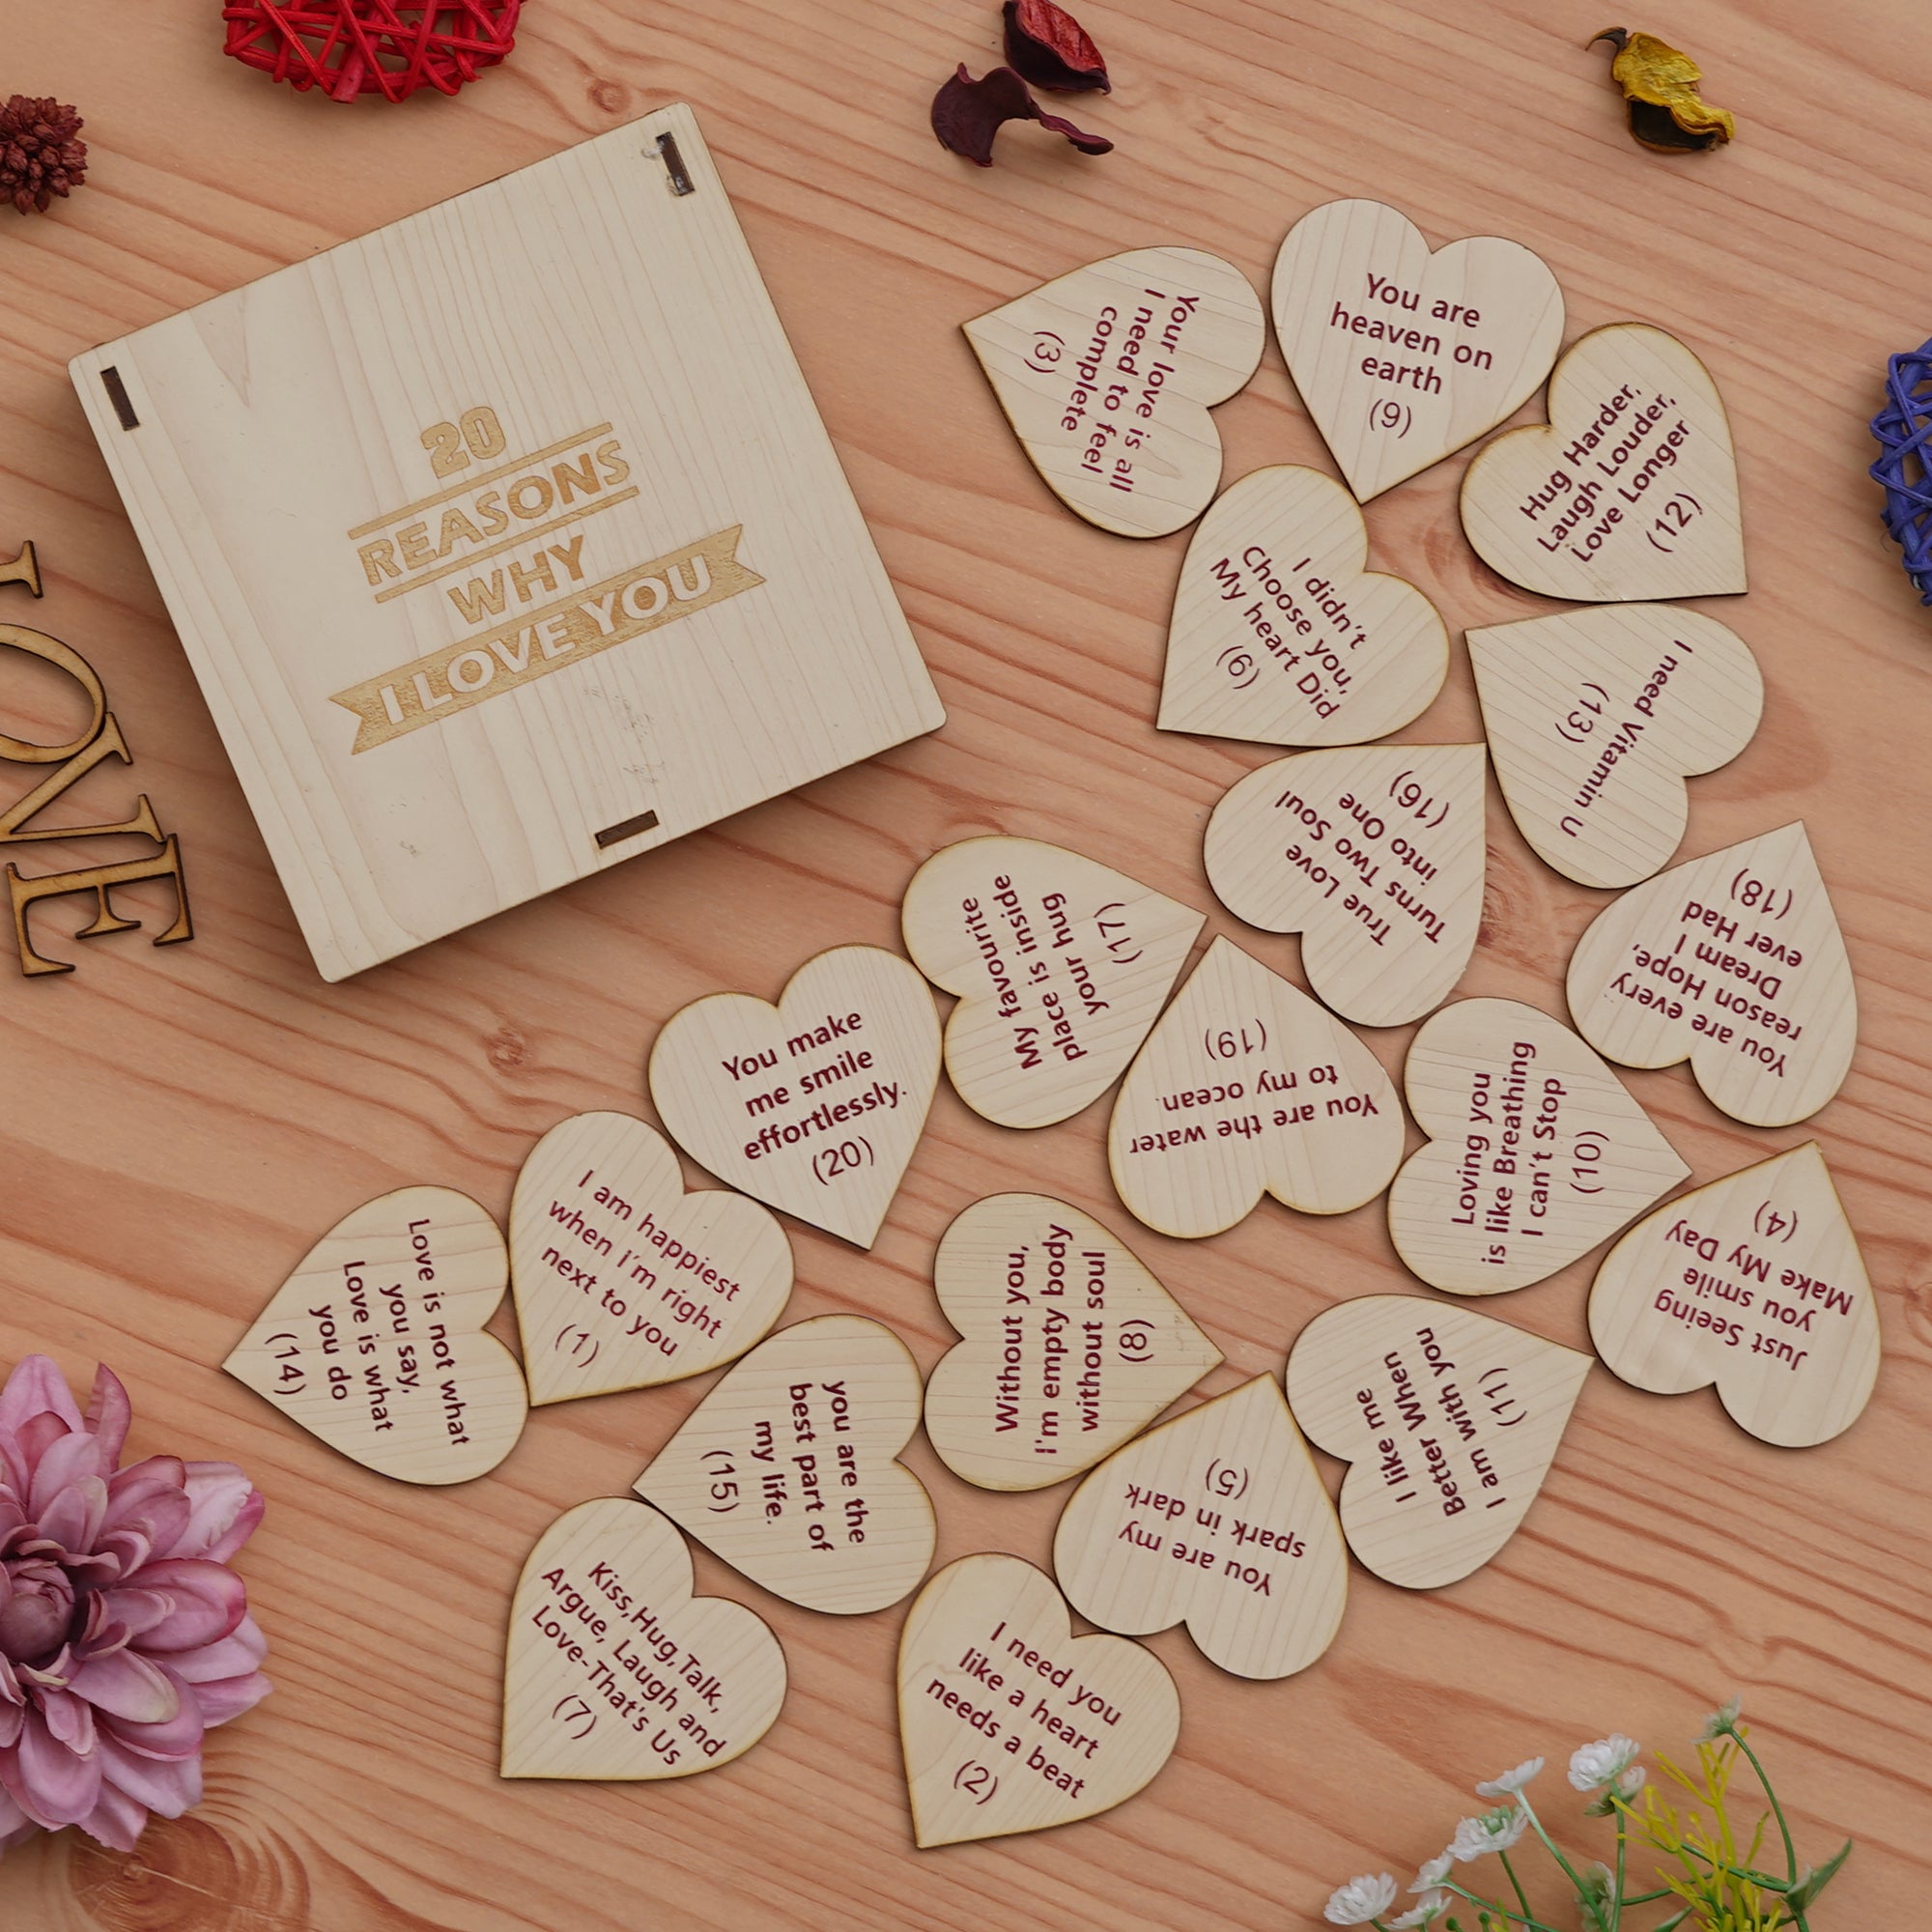 "20 Reasons Why I Love You" Printed on Little Hearts Valentine Brown Wooden Gift Set 3